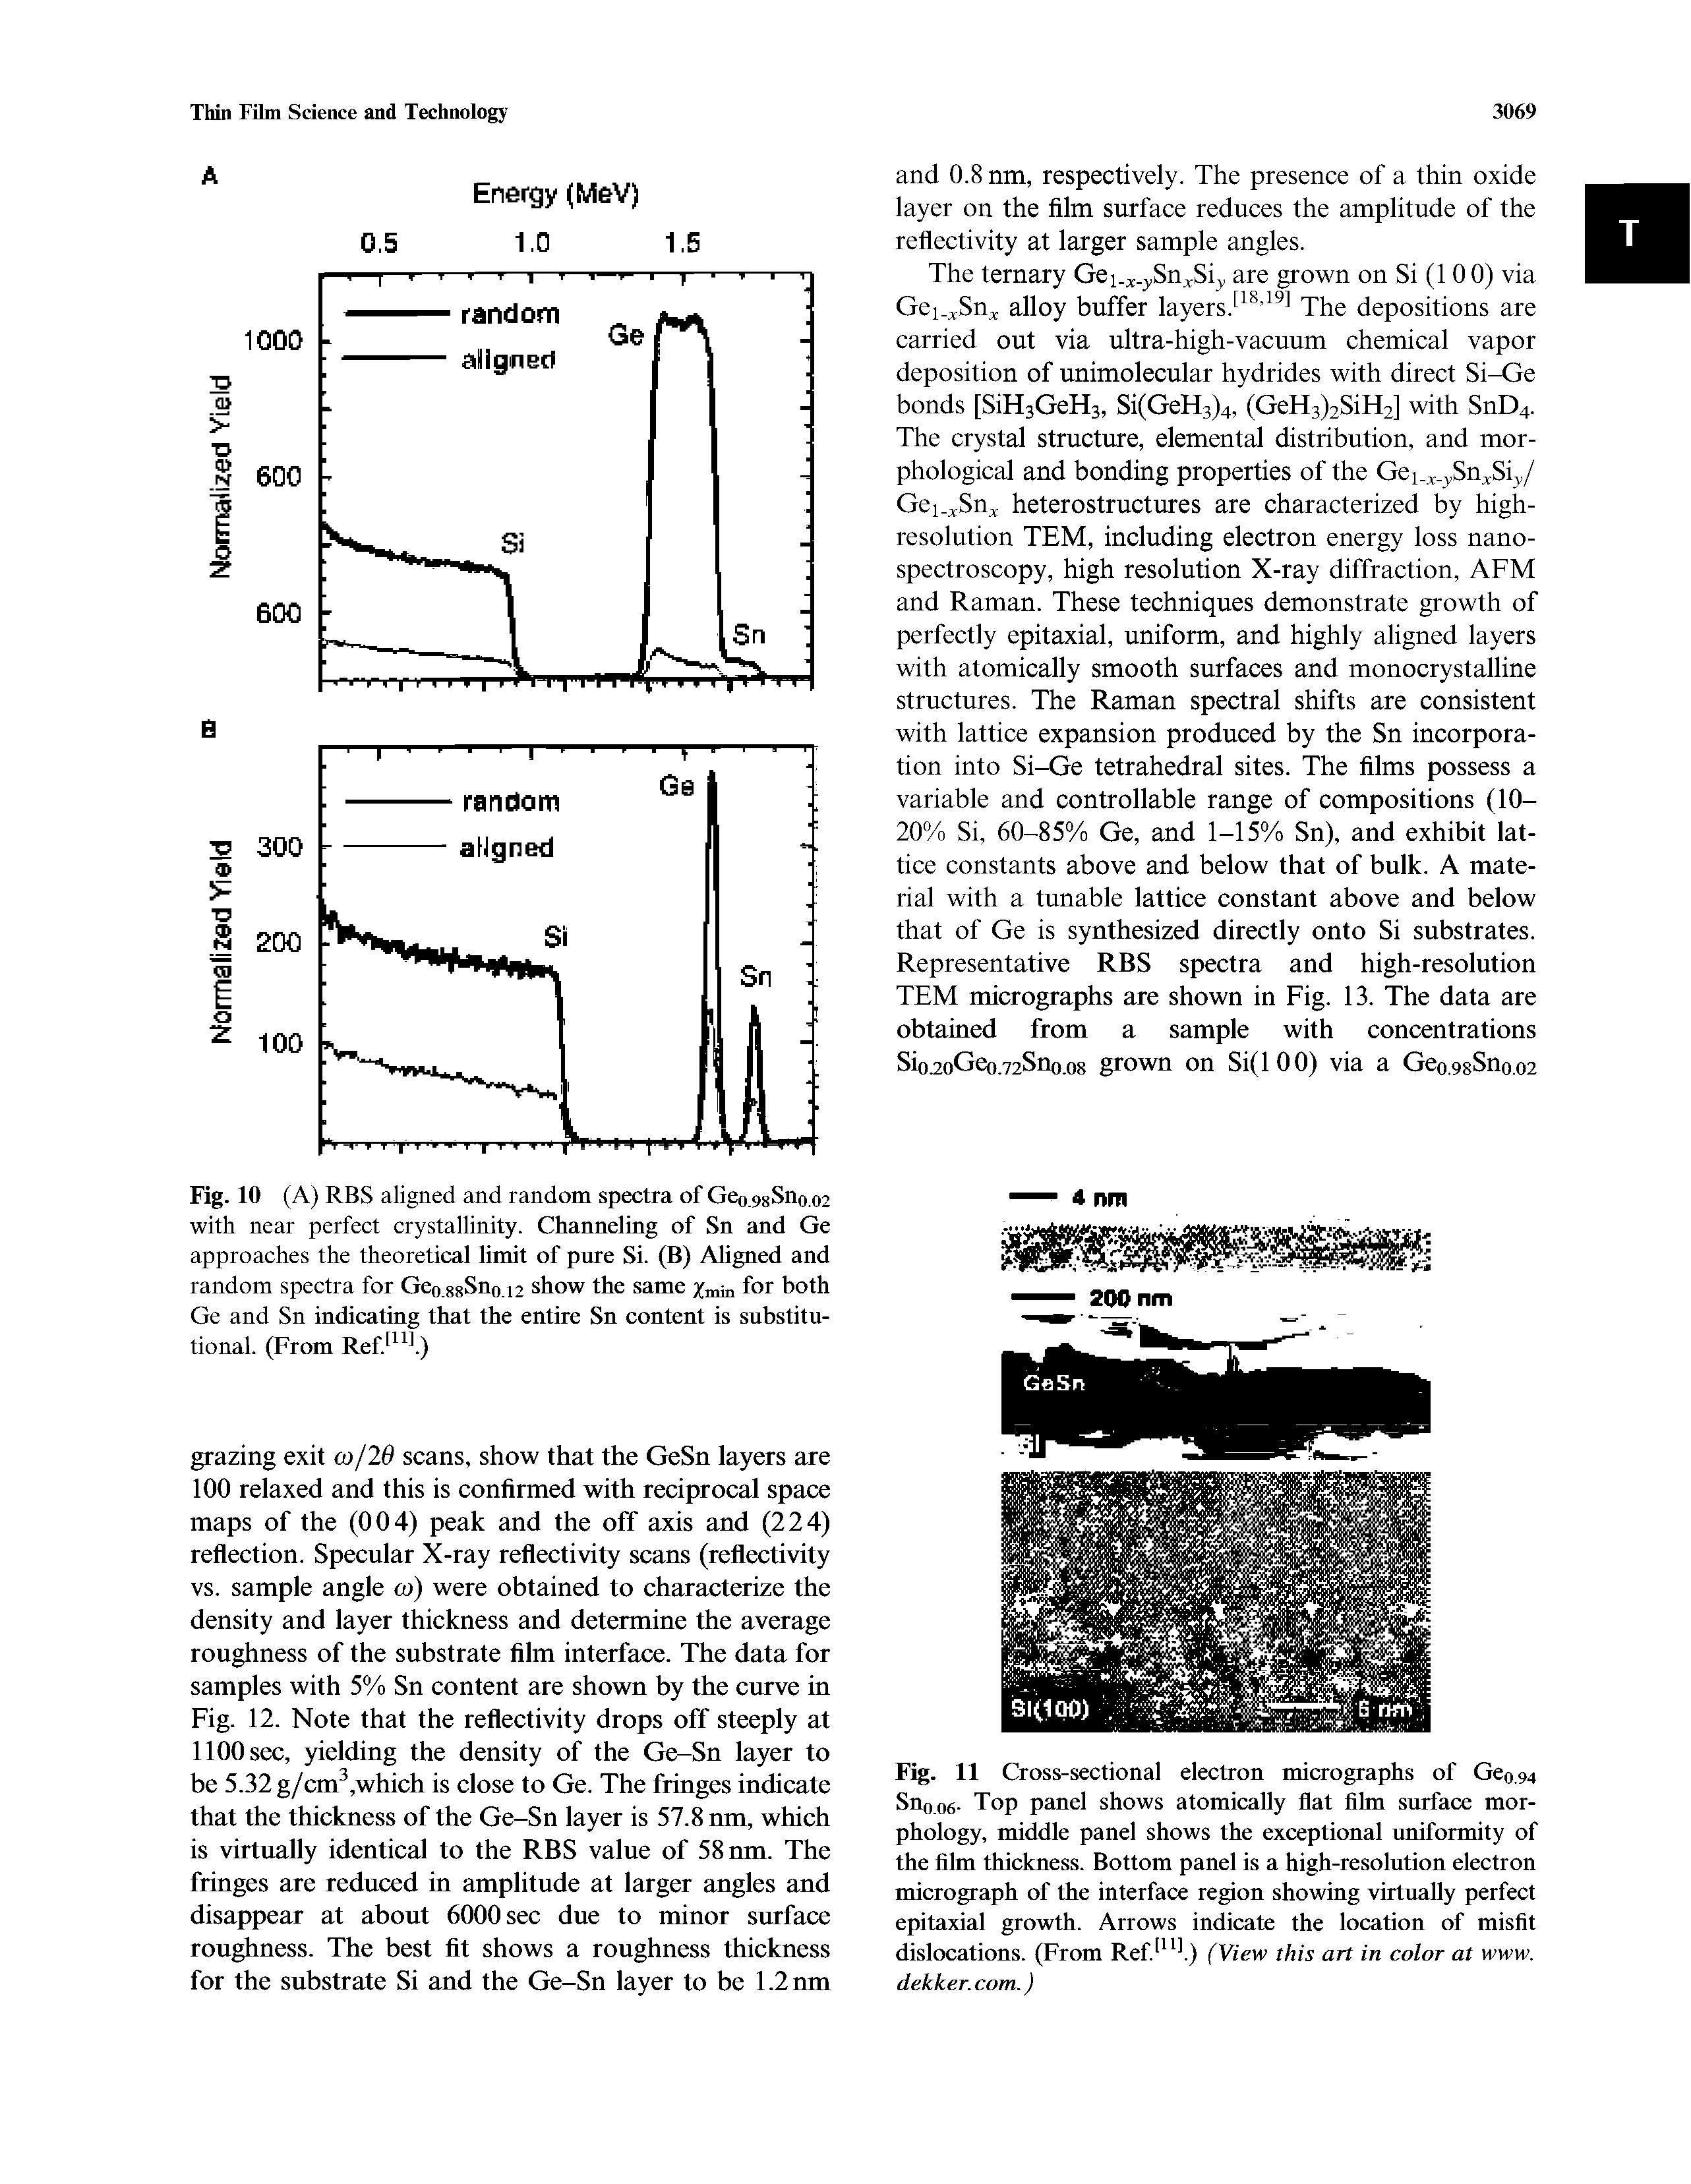 Fig. 11 Cross-sectional electron micrographs of Geo.94 Snoo6- Top panel shows atomically flat film surface morphology, middle panel shows the exceptional uniformity of the film fhickness. Bottom panel is a high-resolution electron micrograph of the interface region showing virtually perfect epitaxial growth. Arrows indicate the location of misfit dislocations. (From Ref. l) (View this art in color at www. dekker.com.)...